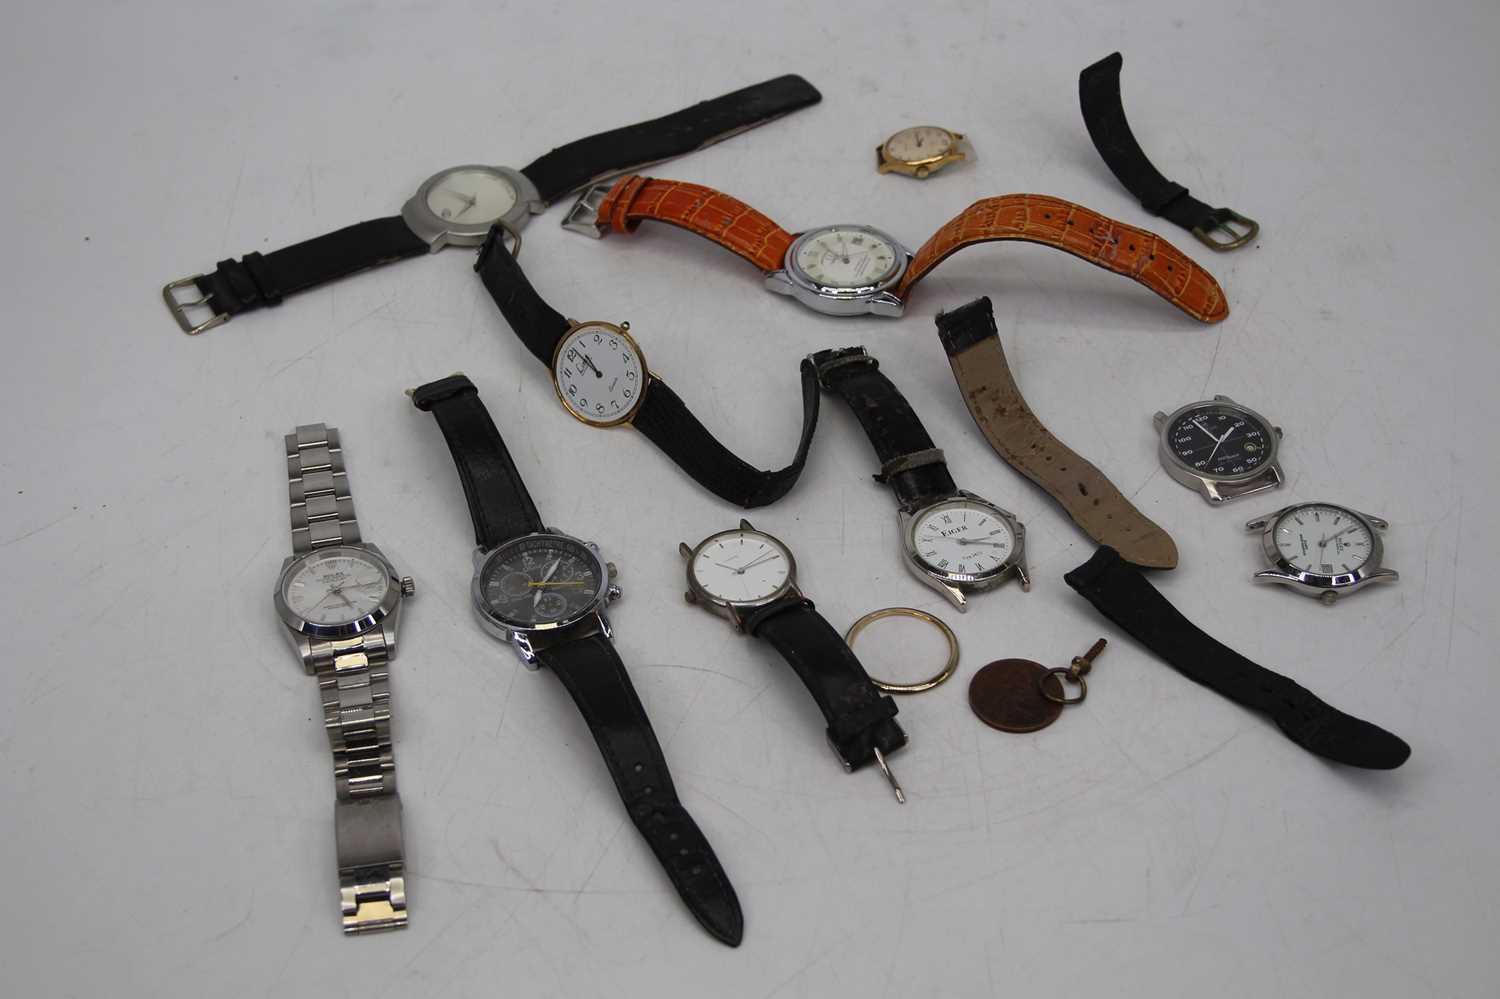 A copy of a Rolex Oyster Perpetual Datejust wristwatch; together with various other gent's fashion